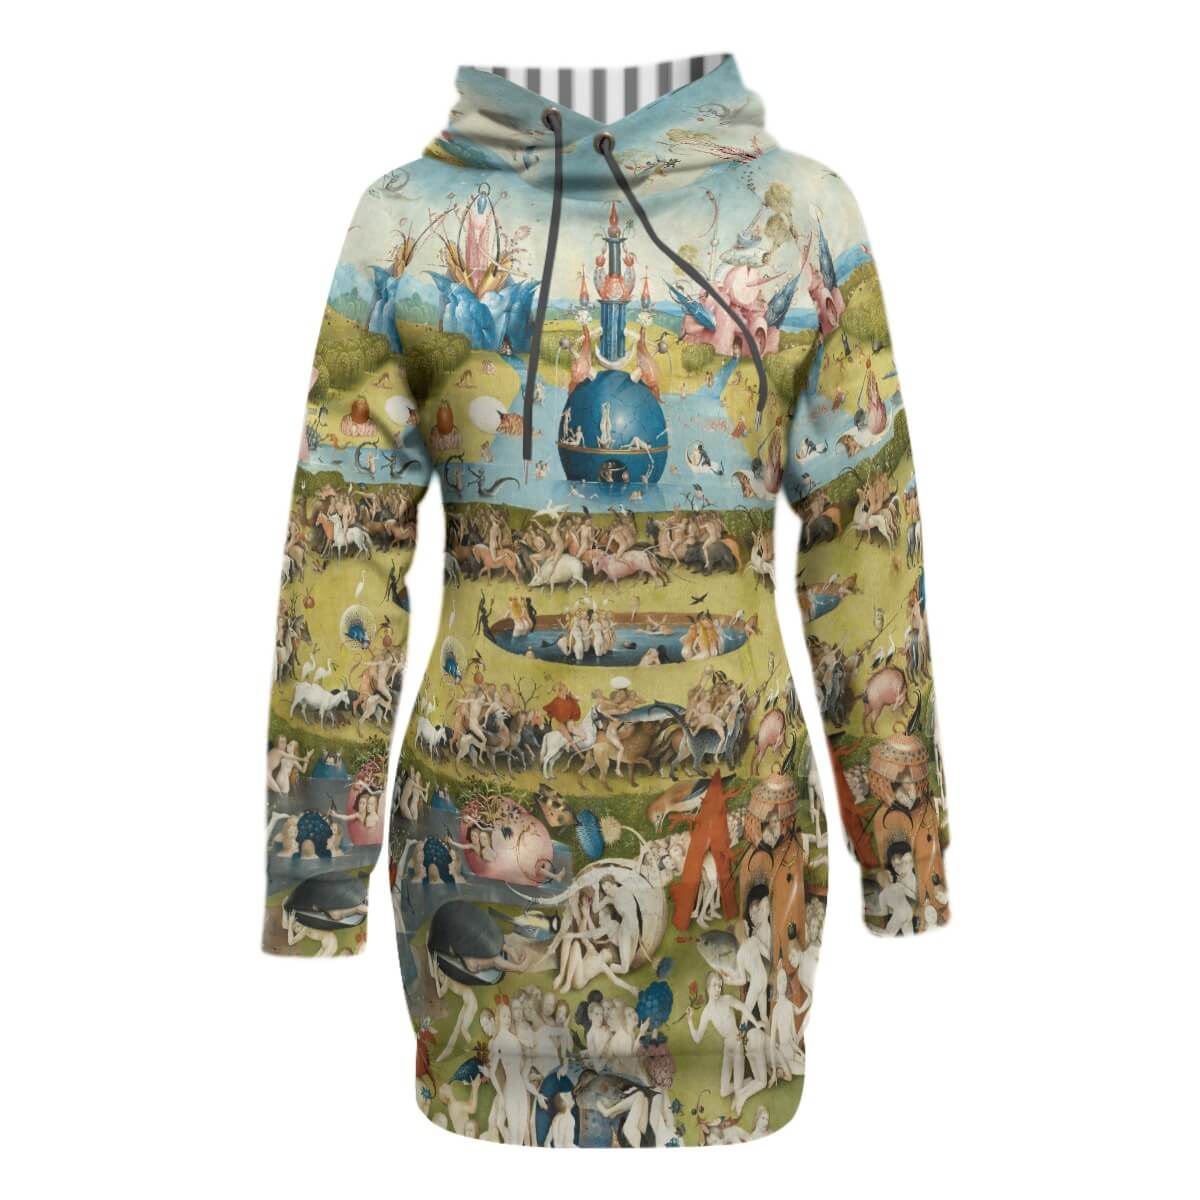 Hieronymus Bosch Earthly Delights Women's Hoodie